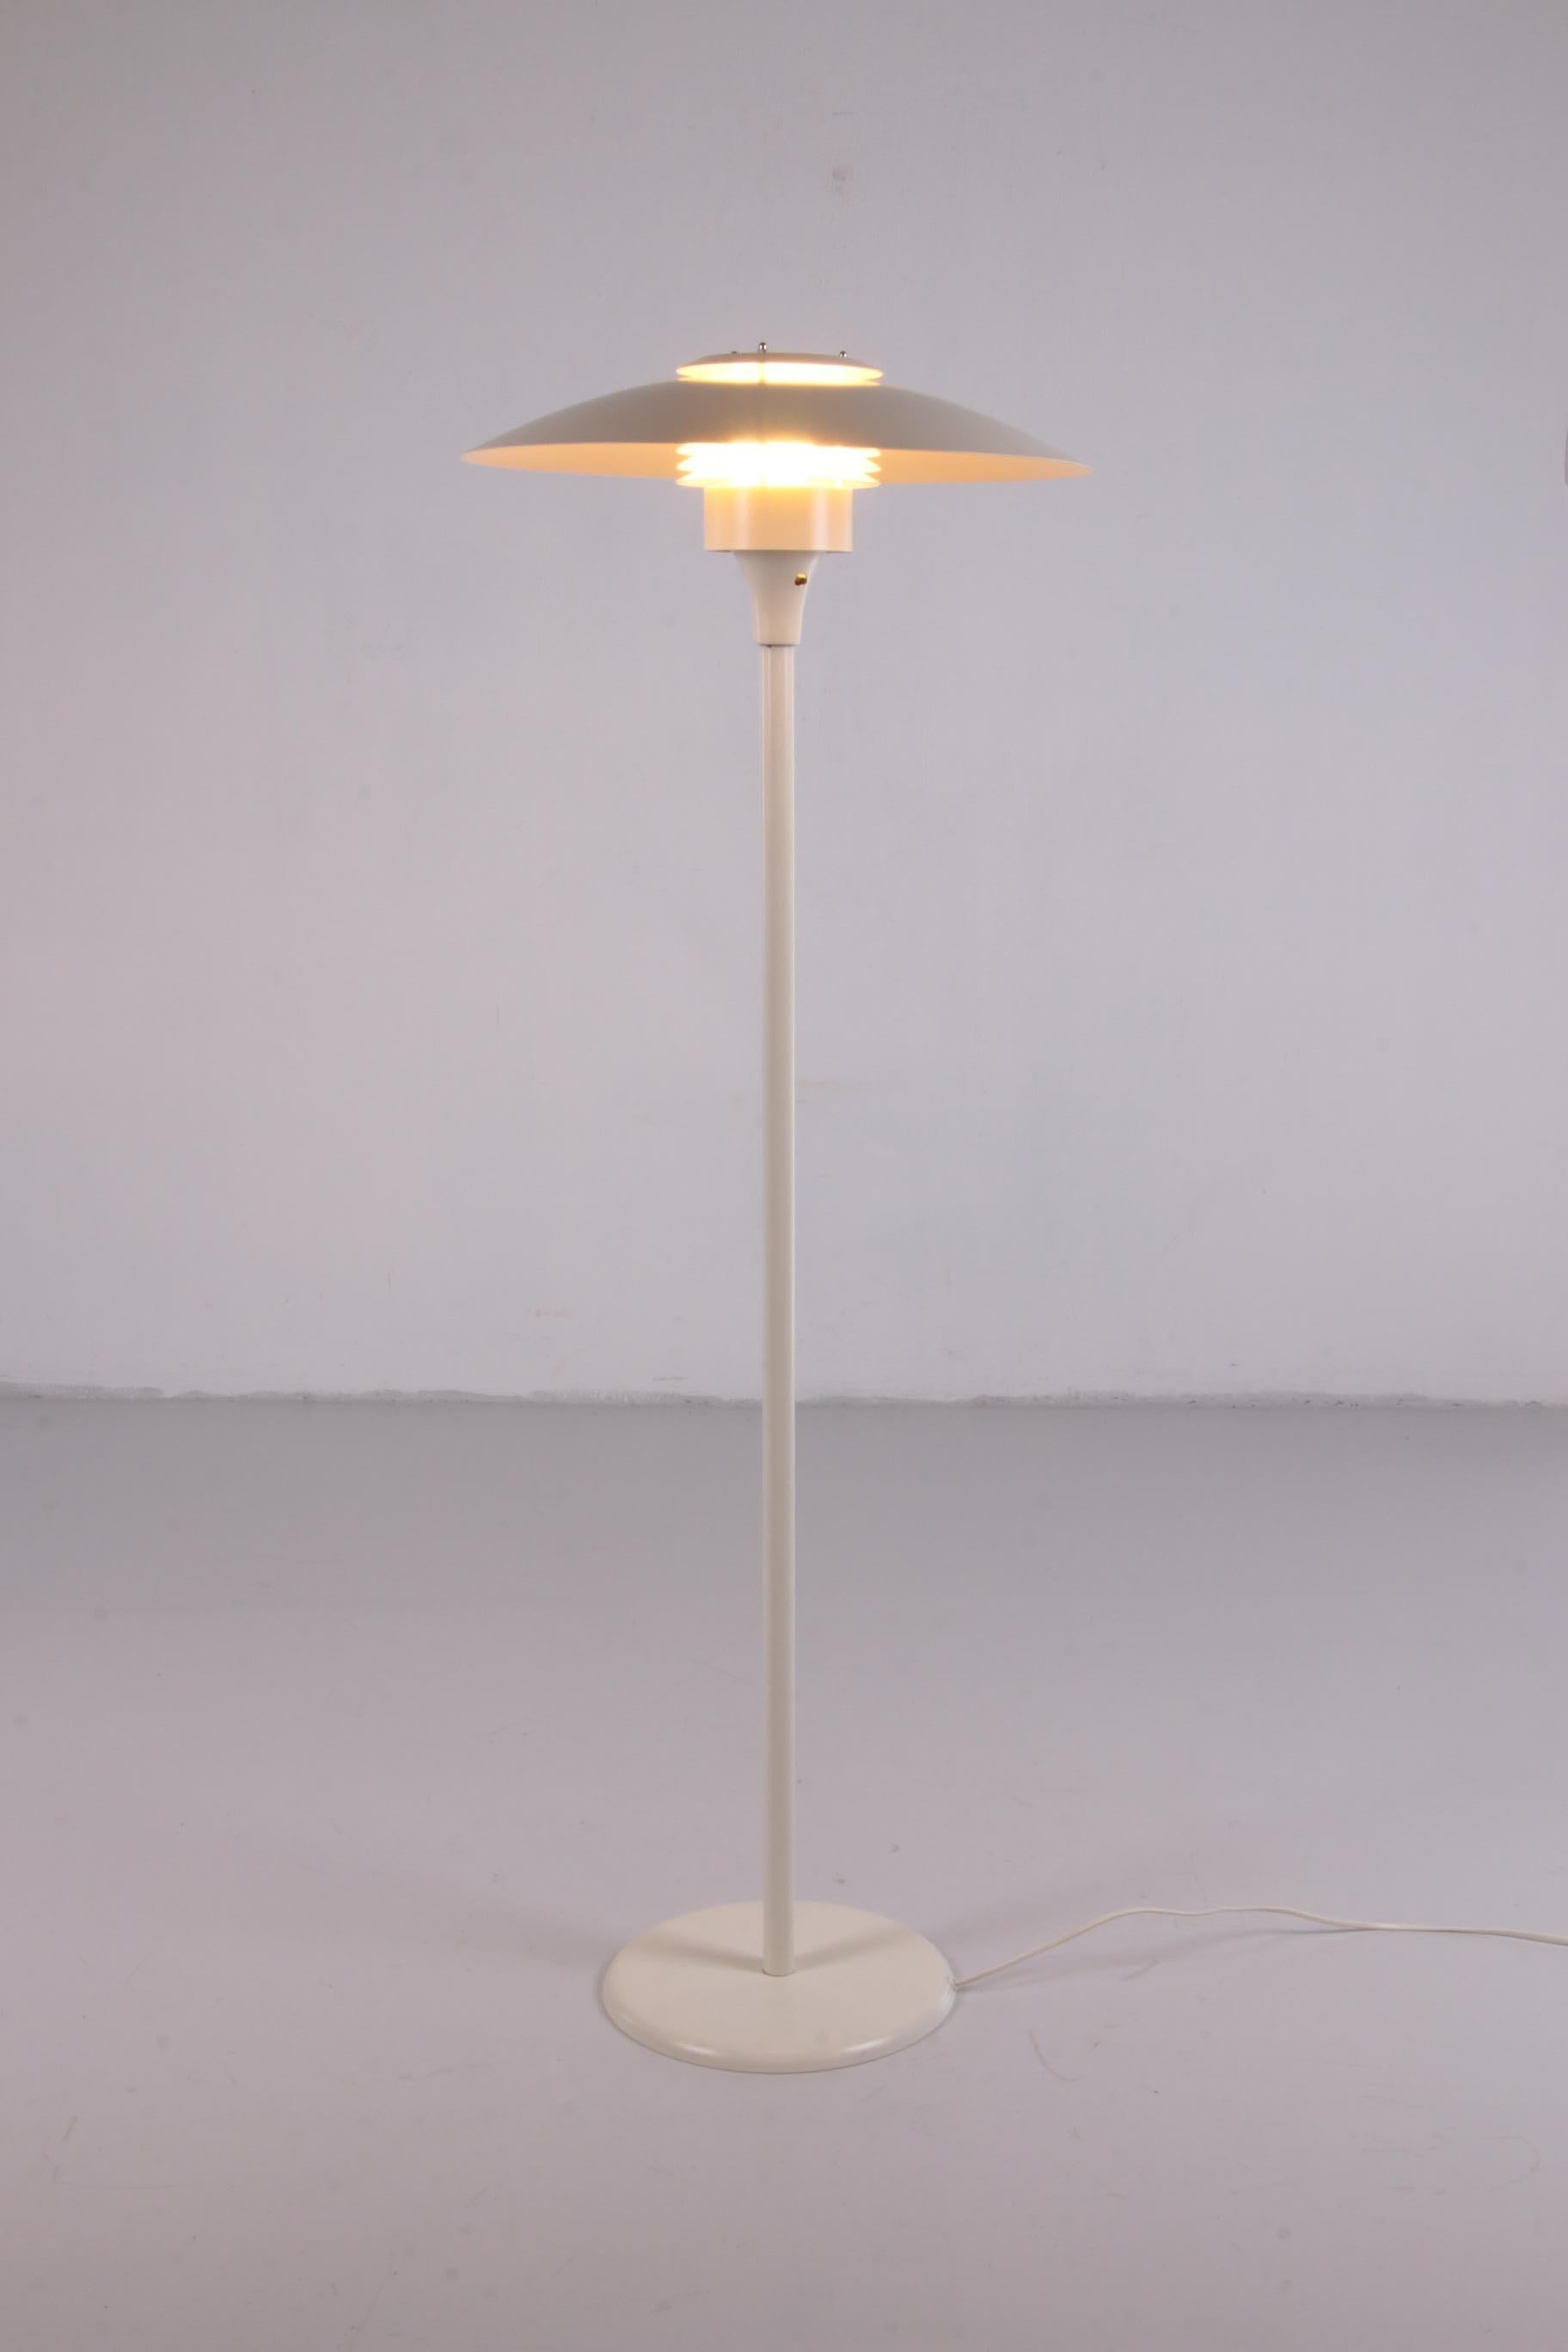 Vintage disks floor lamp produced by Lyfa Denmark. The lamp is in excellent condition and is marked. Switch is located under the disks.

This charming Scandinavian floor lamp was produced by Lyfa Denmark in the 1960s. It consists of a metal housing